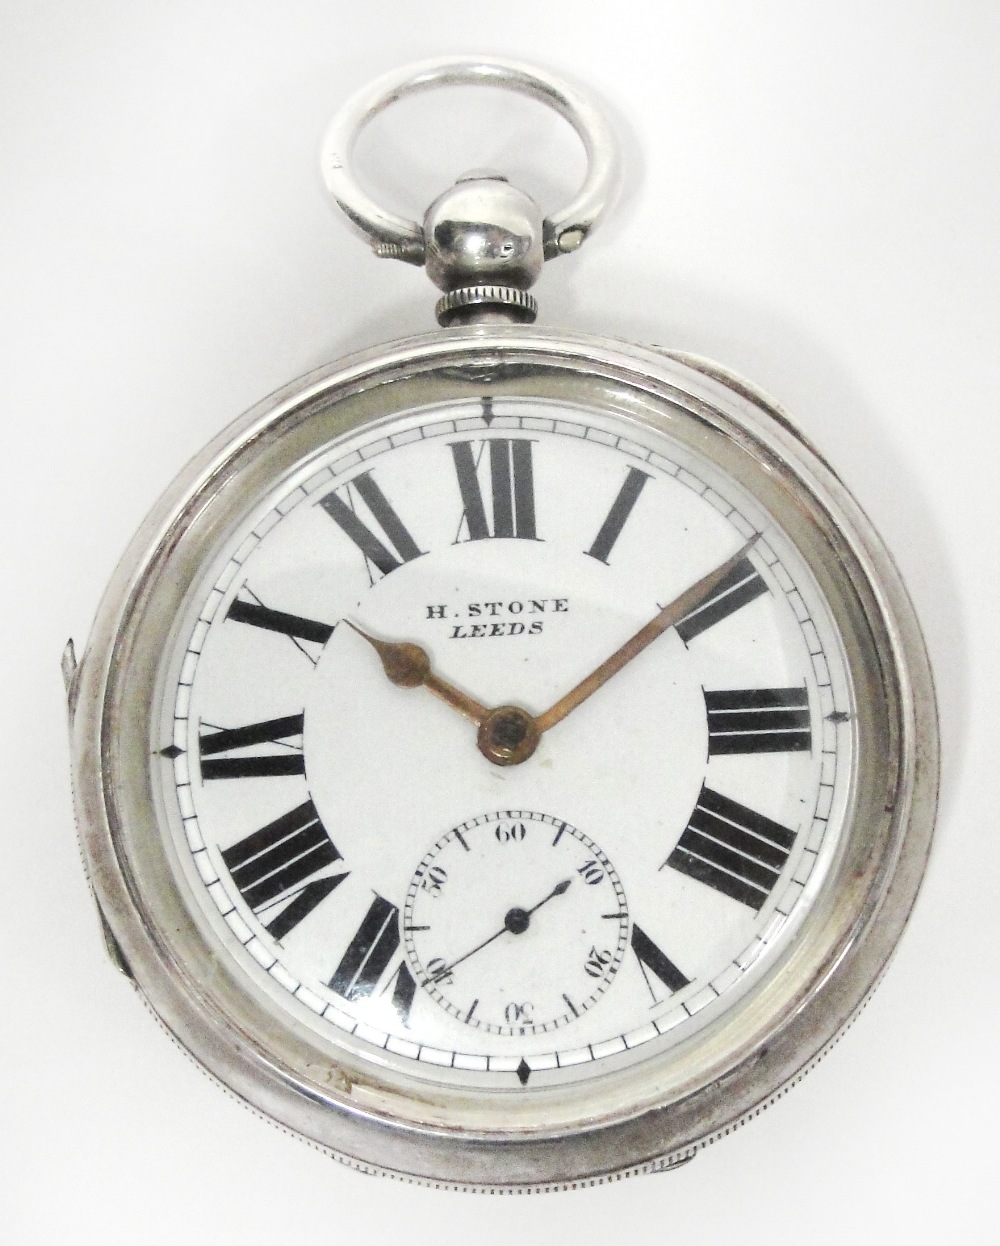 An early 20th century silver cased open face pocket watch, the circular dial set with Roman numerals